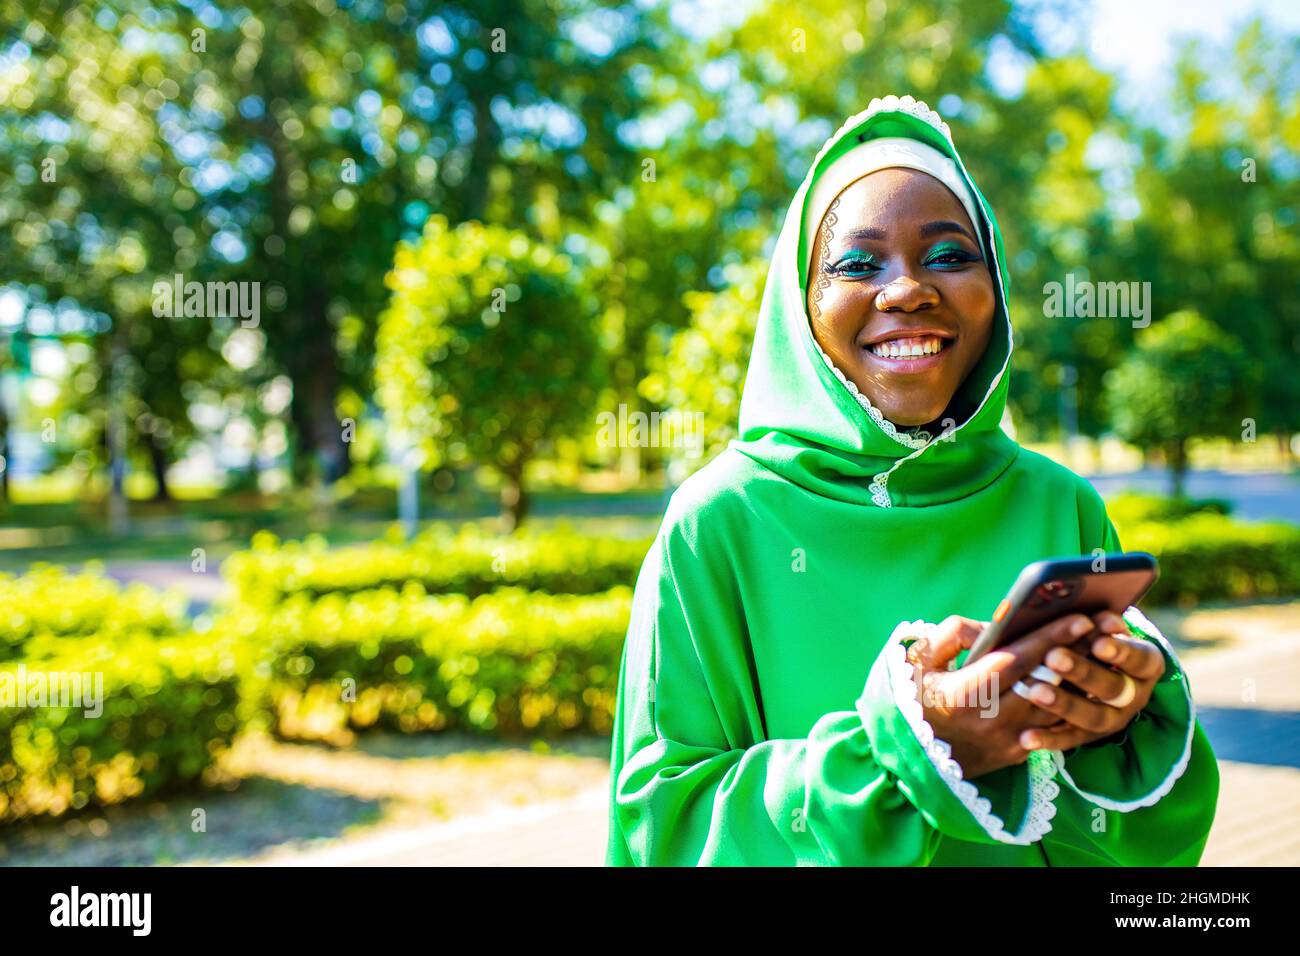 latin hispanic arab woman in green muslim dress with modern bright make up and nose piercing looking at phone screen outdoors Stock Photo